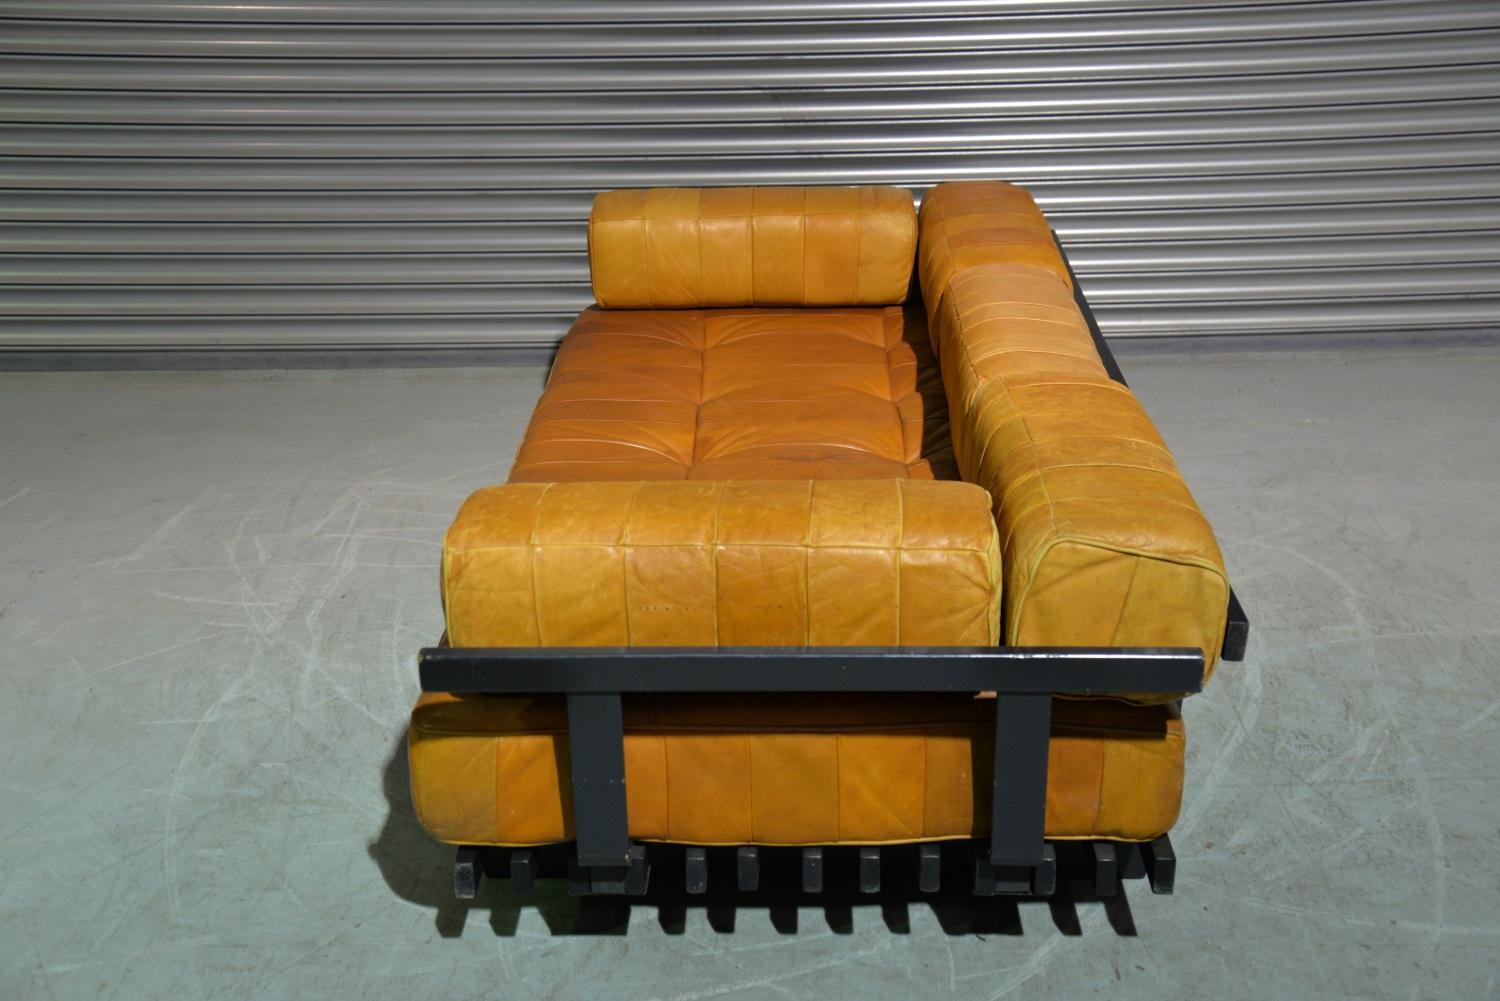 Vintage De Sede Ds 80 Patchwork Leather Daybed, Switzerland 1960s For Sale 2